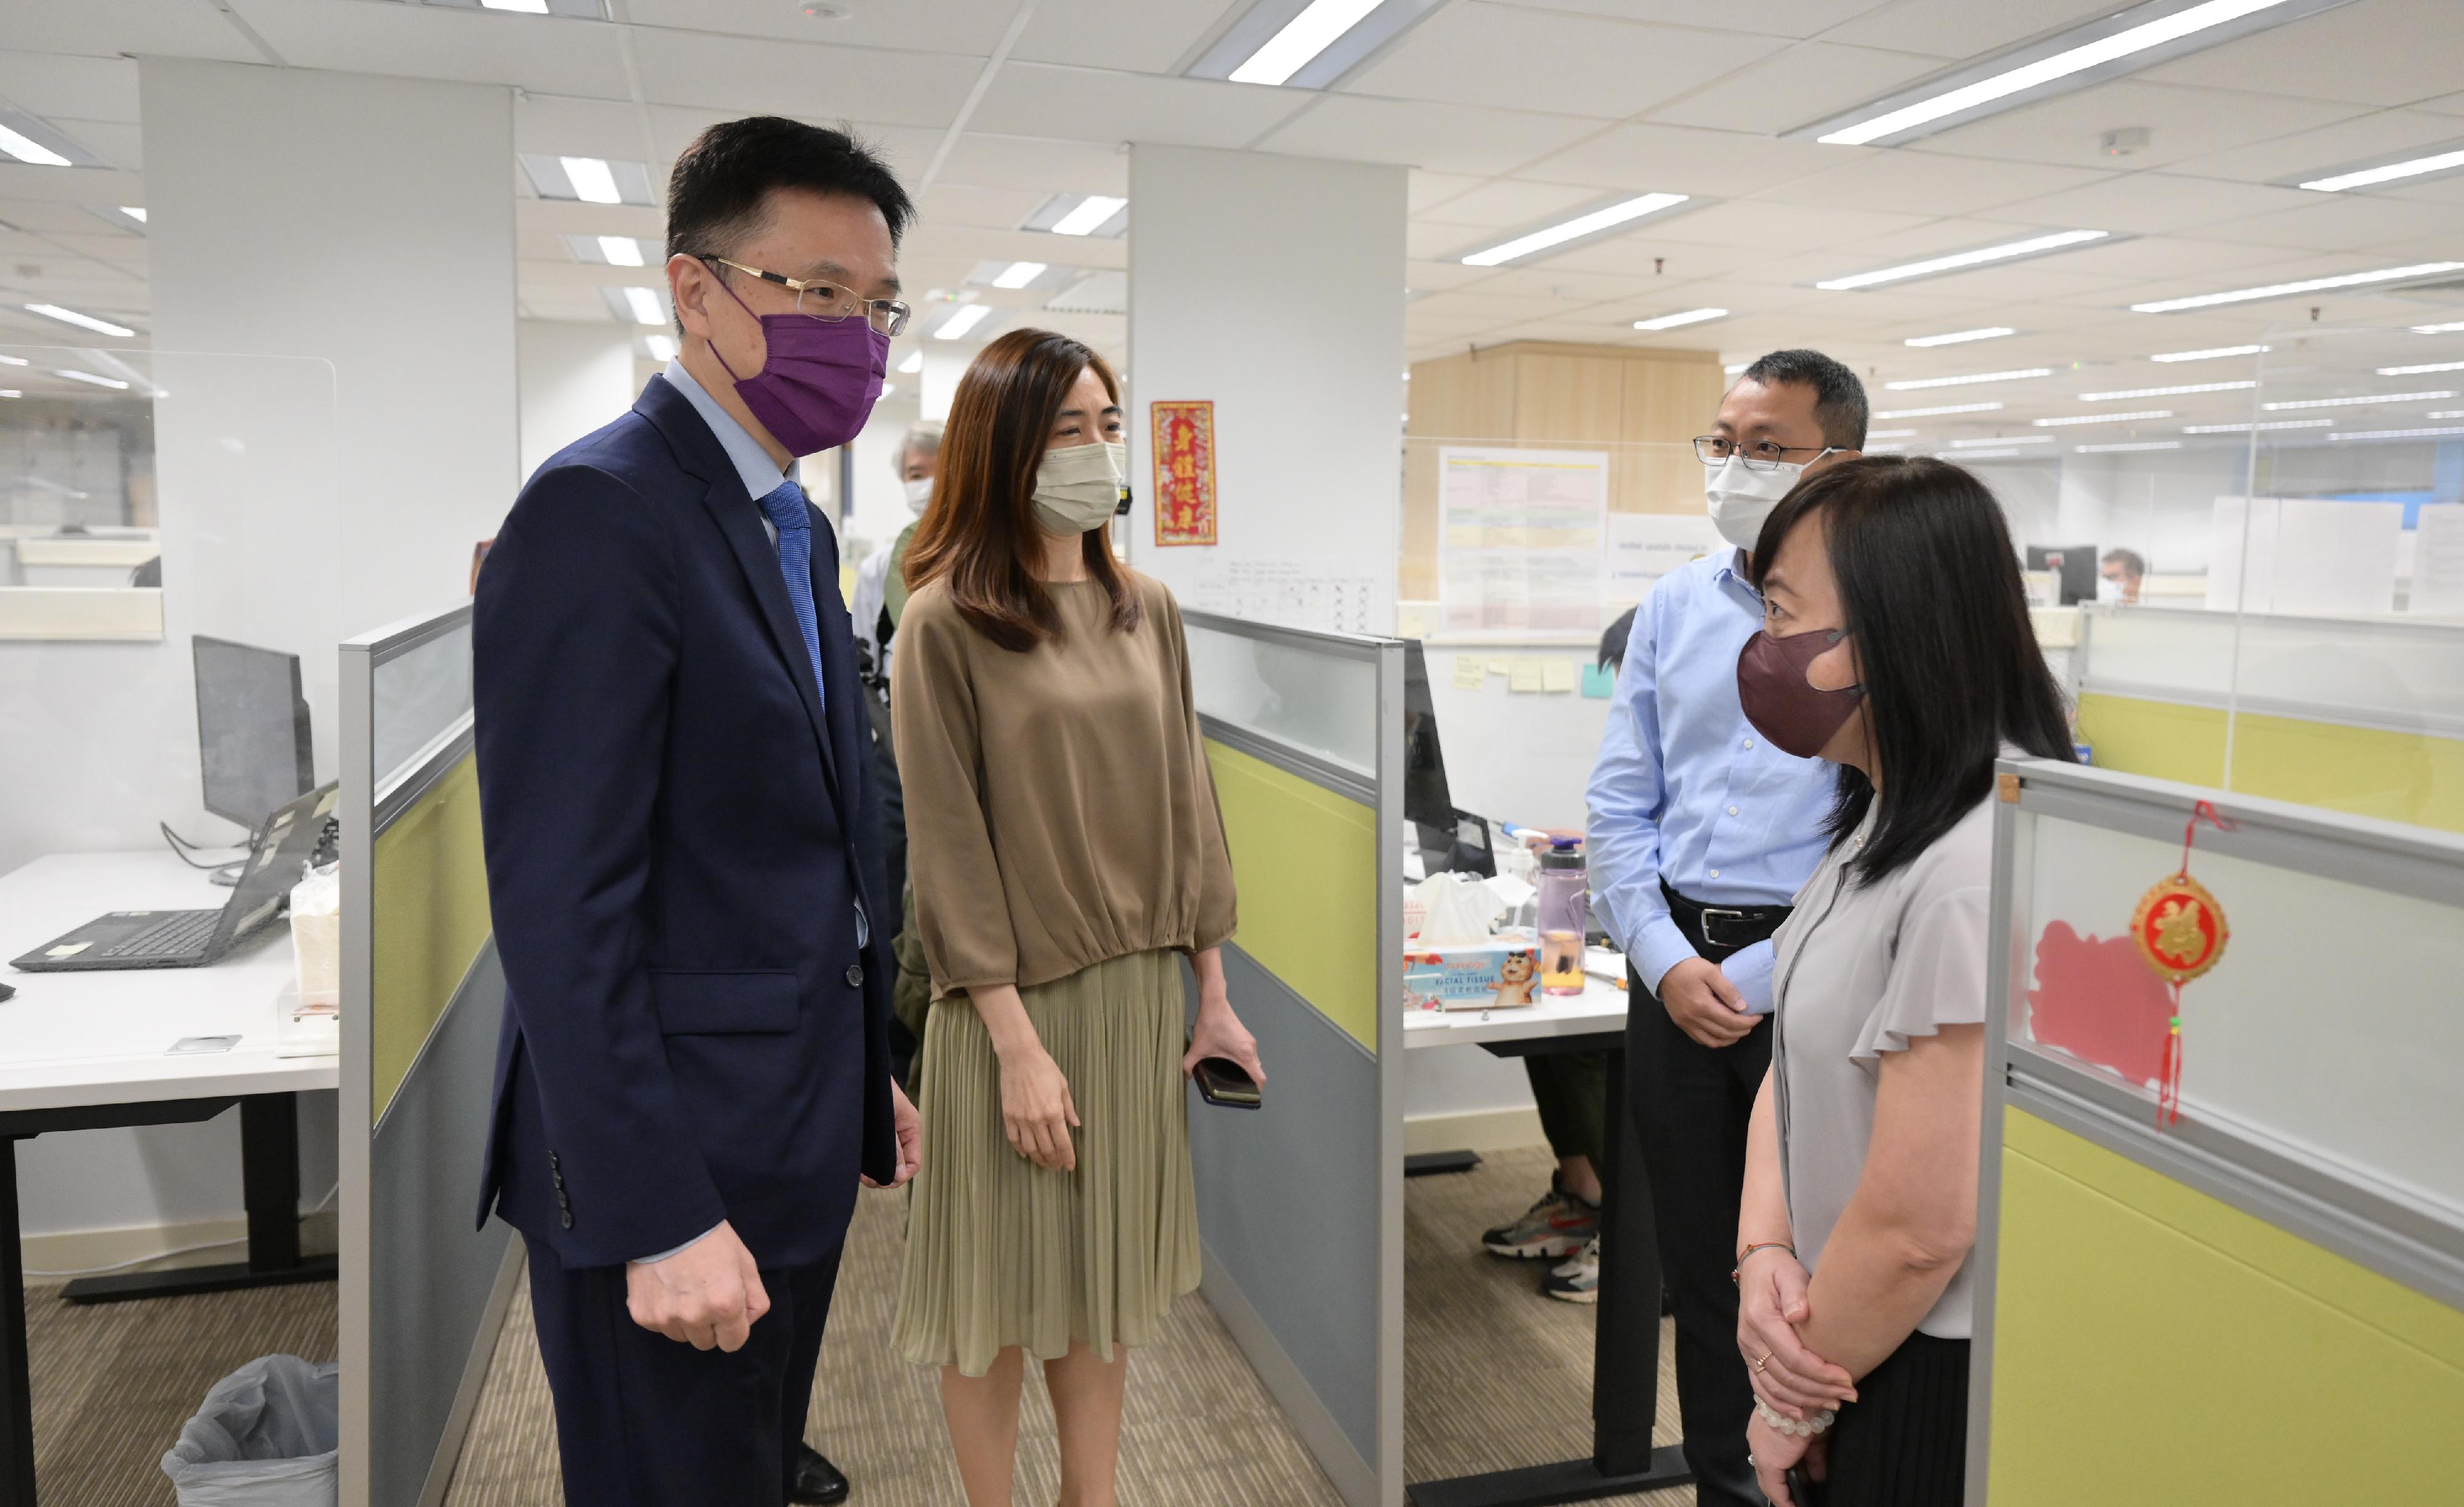 The Secretary for Innovation, Technology and Industry, Professor Sun Dong (first left), visits the Compulsory Quarantine Support Centre set up by the Office of the Government Chief Information Officer (OGCIO) in Wong Chuk Hang today (August 12) and chats with OGCIO colleagues to encourage them.